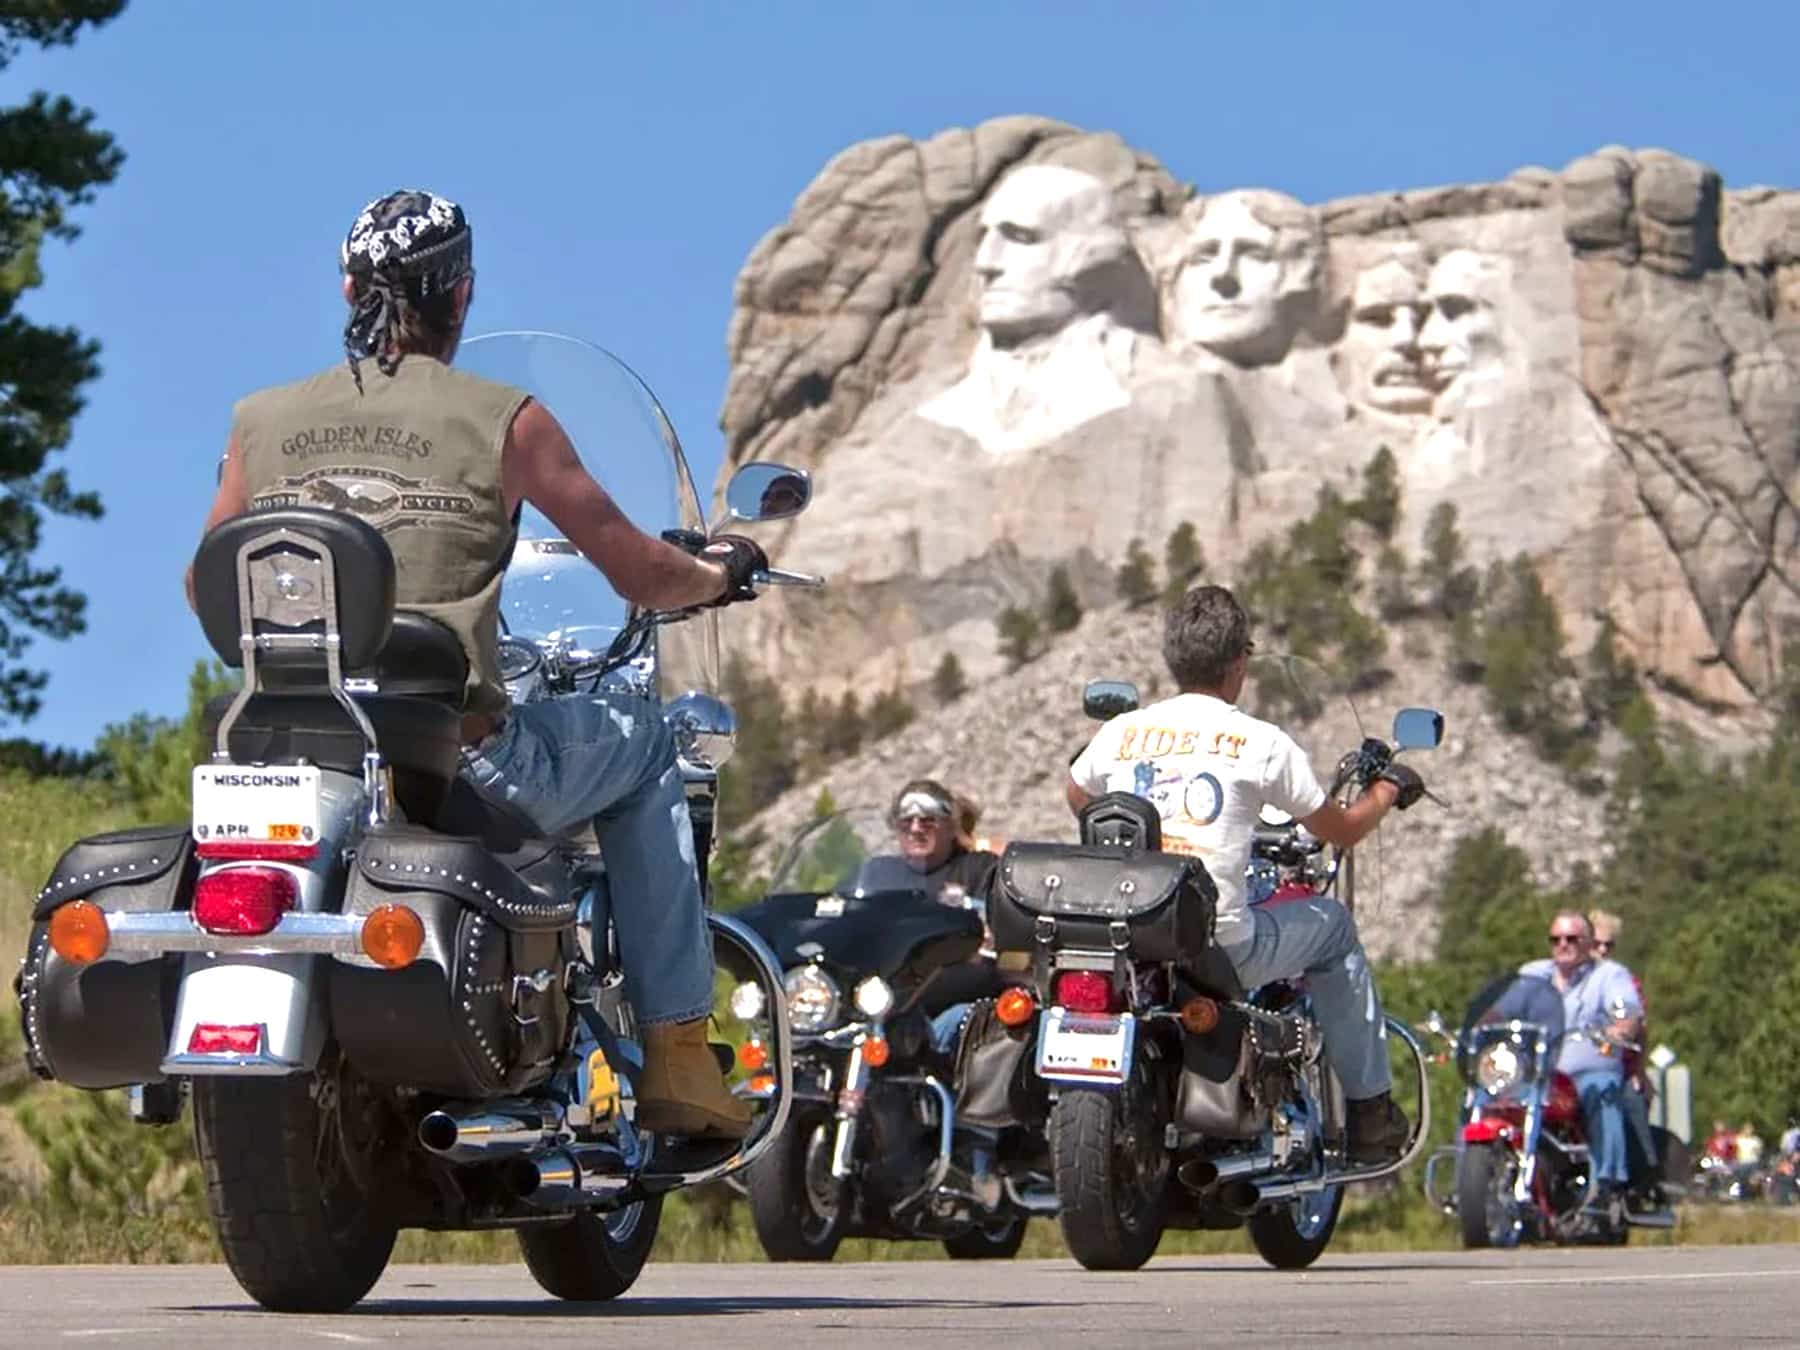 Enter to win a prize package to Sturgis North Dakota